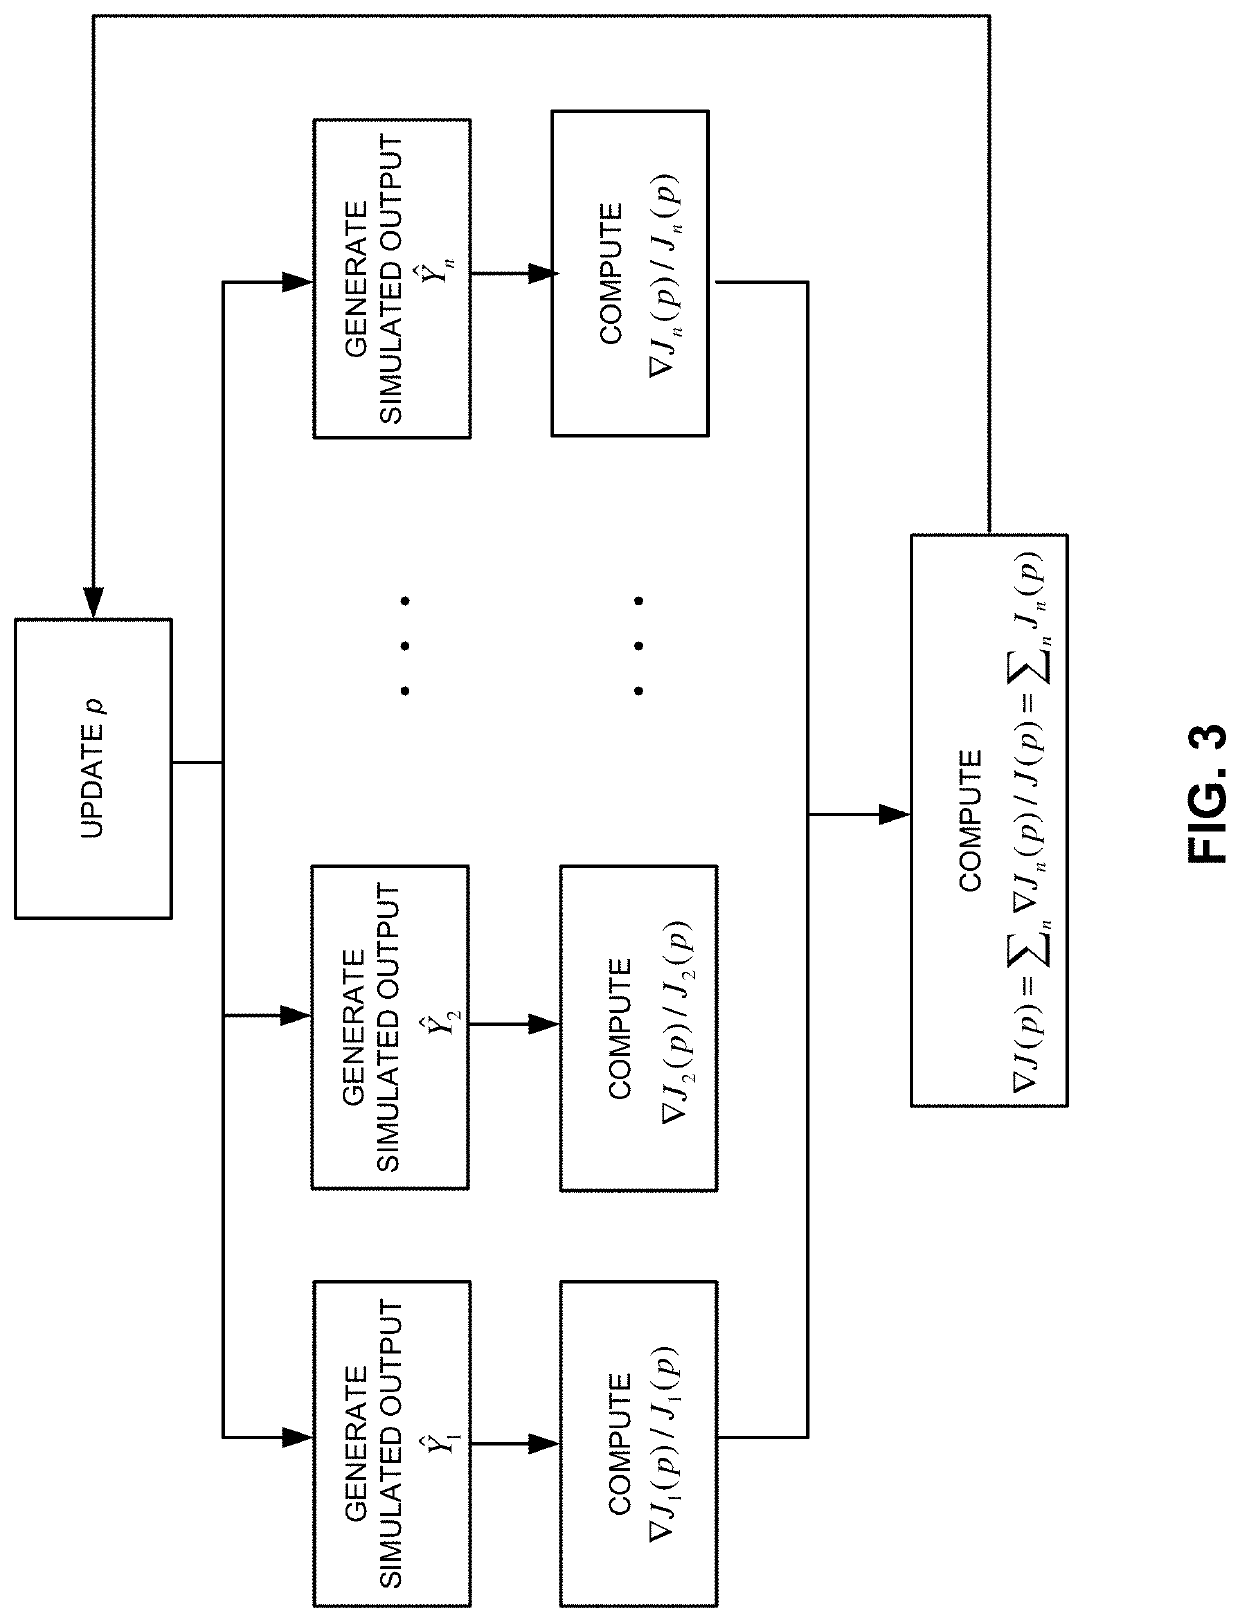 Model-based diagnosis in frequency domain